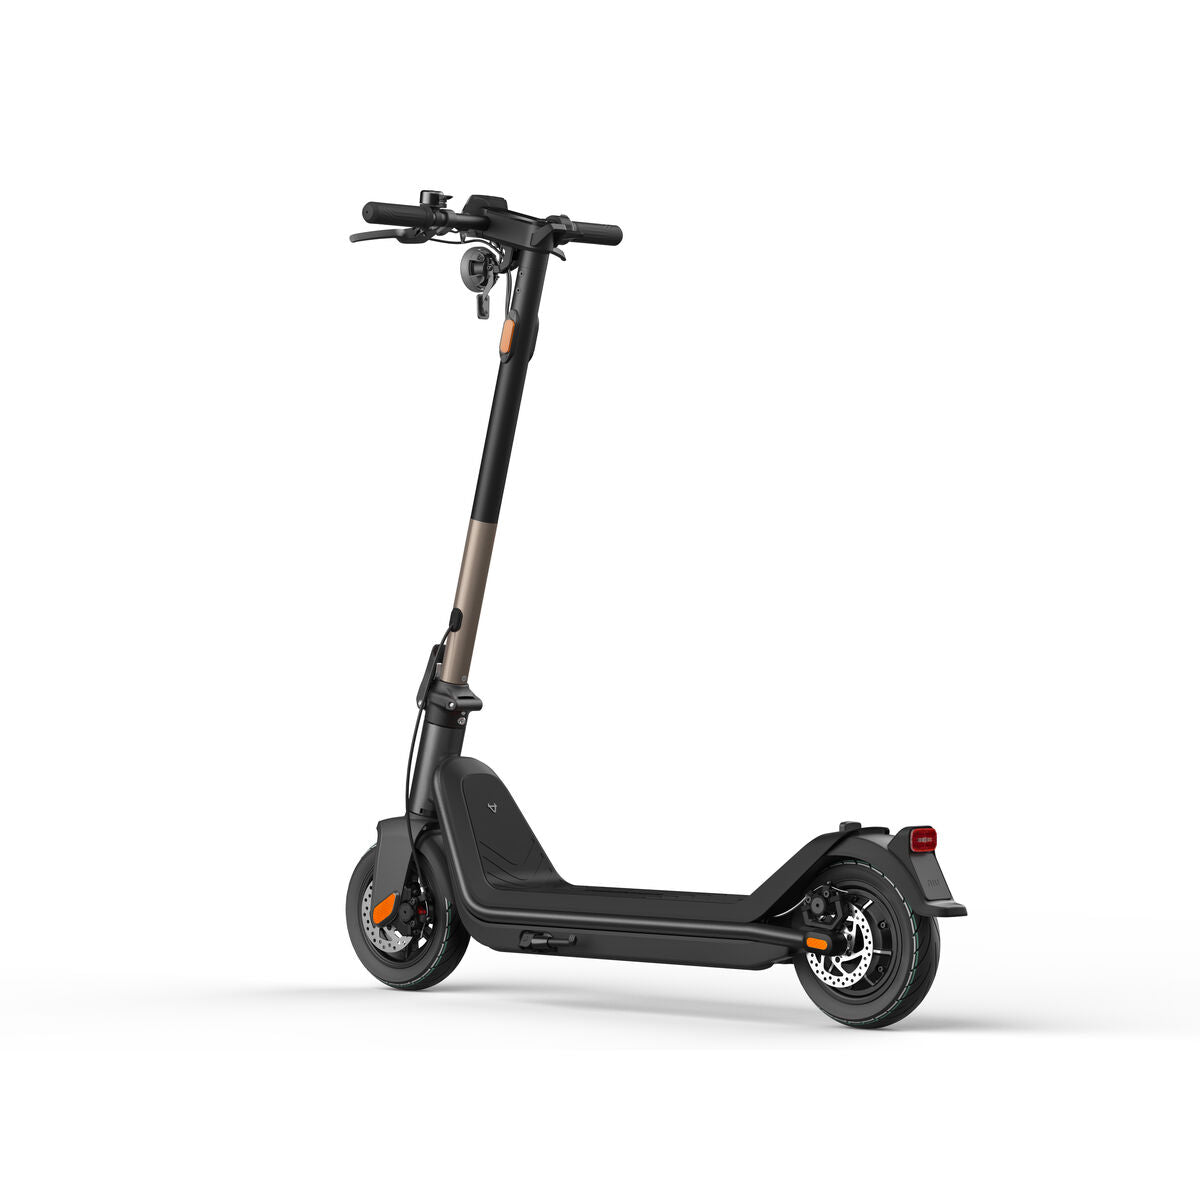 Electric Scooter Niu KQi3 Pro Golden 48 V, Niu, Sports and outdoors, Urban mobility, electric-scooter-niu-kqi3-pro-golden-48-v, Brand_Niu, category-reference-2609, category-reference-2629, category-reference-2904, category-reference-t-19681, category-reference-t-19756, category-reference-t-19876, category-reference-t-21245, Condition_NEW, deportista / en forma, Price_800 - 900, RiotNook